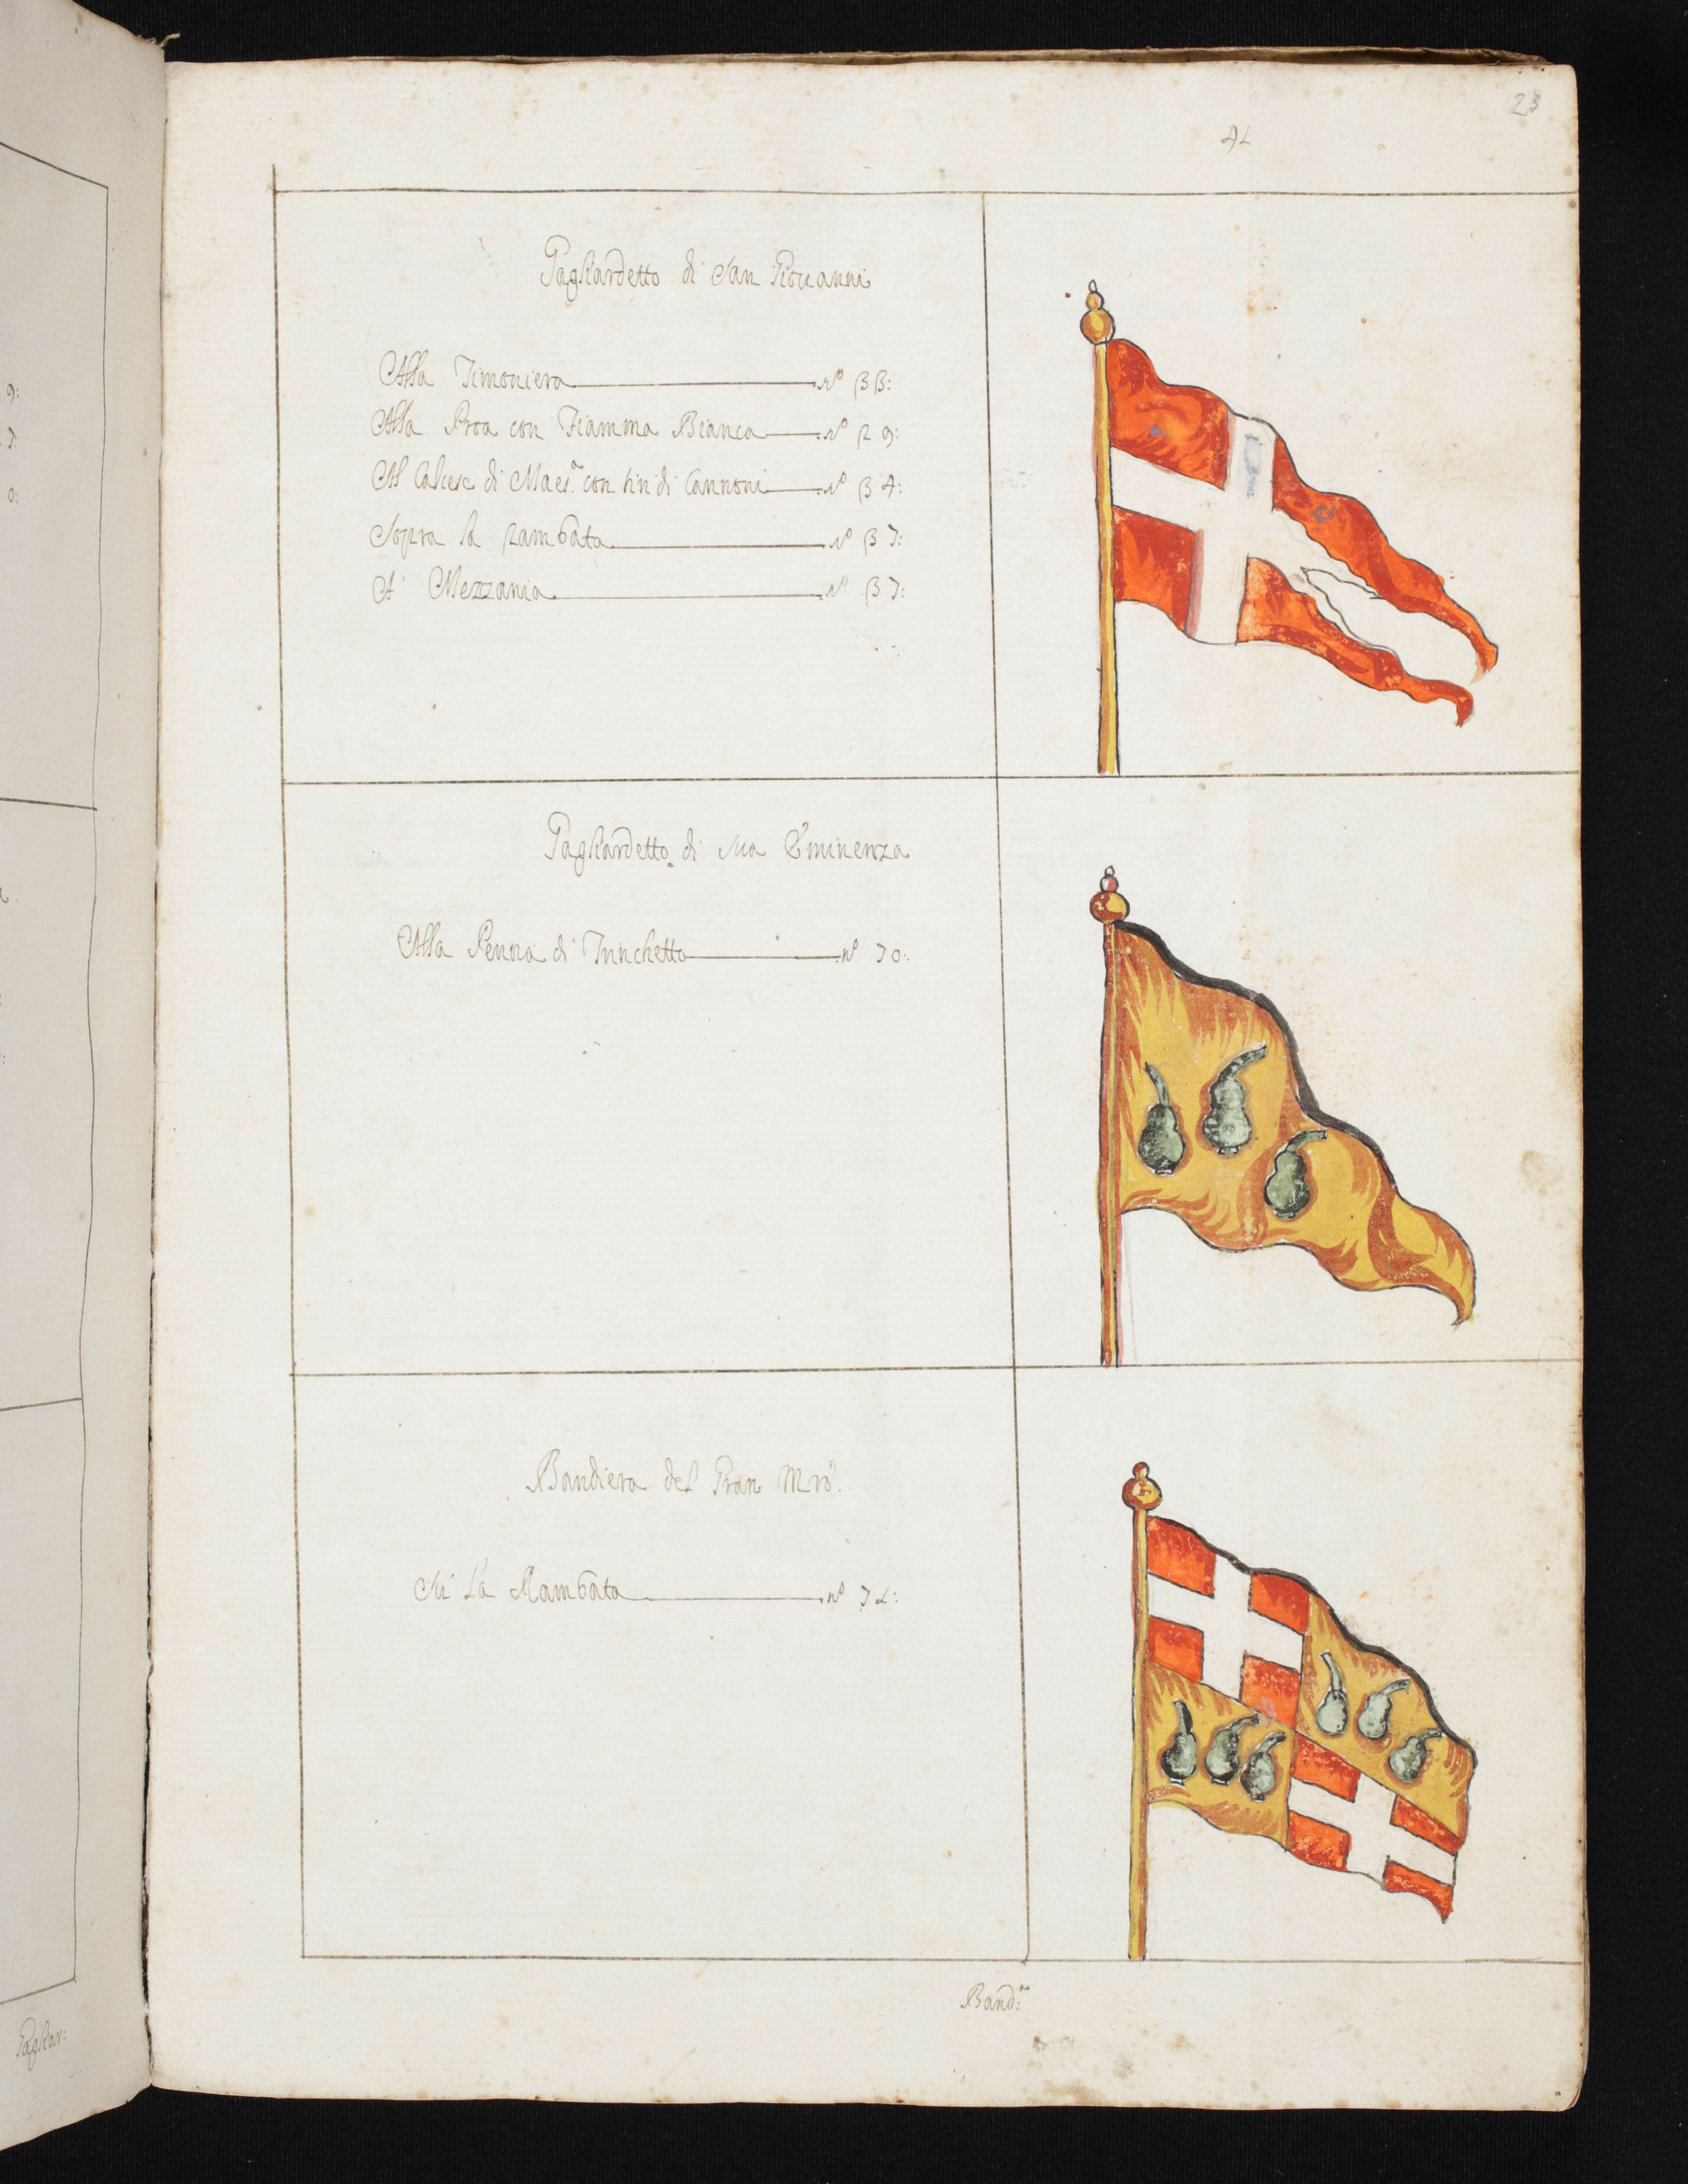 Flag signal book and naval regulations from Catholic University of America. Rare Books and Special Collections (<a href='https://w3id.org/vhmml/readingRoom/view/500329'>CUAMAL 00001</a>)